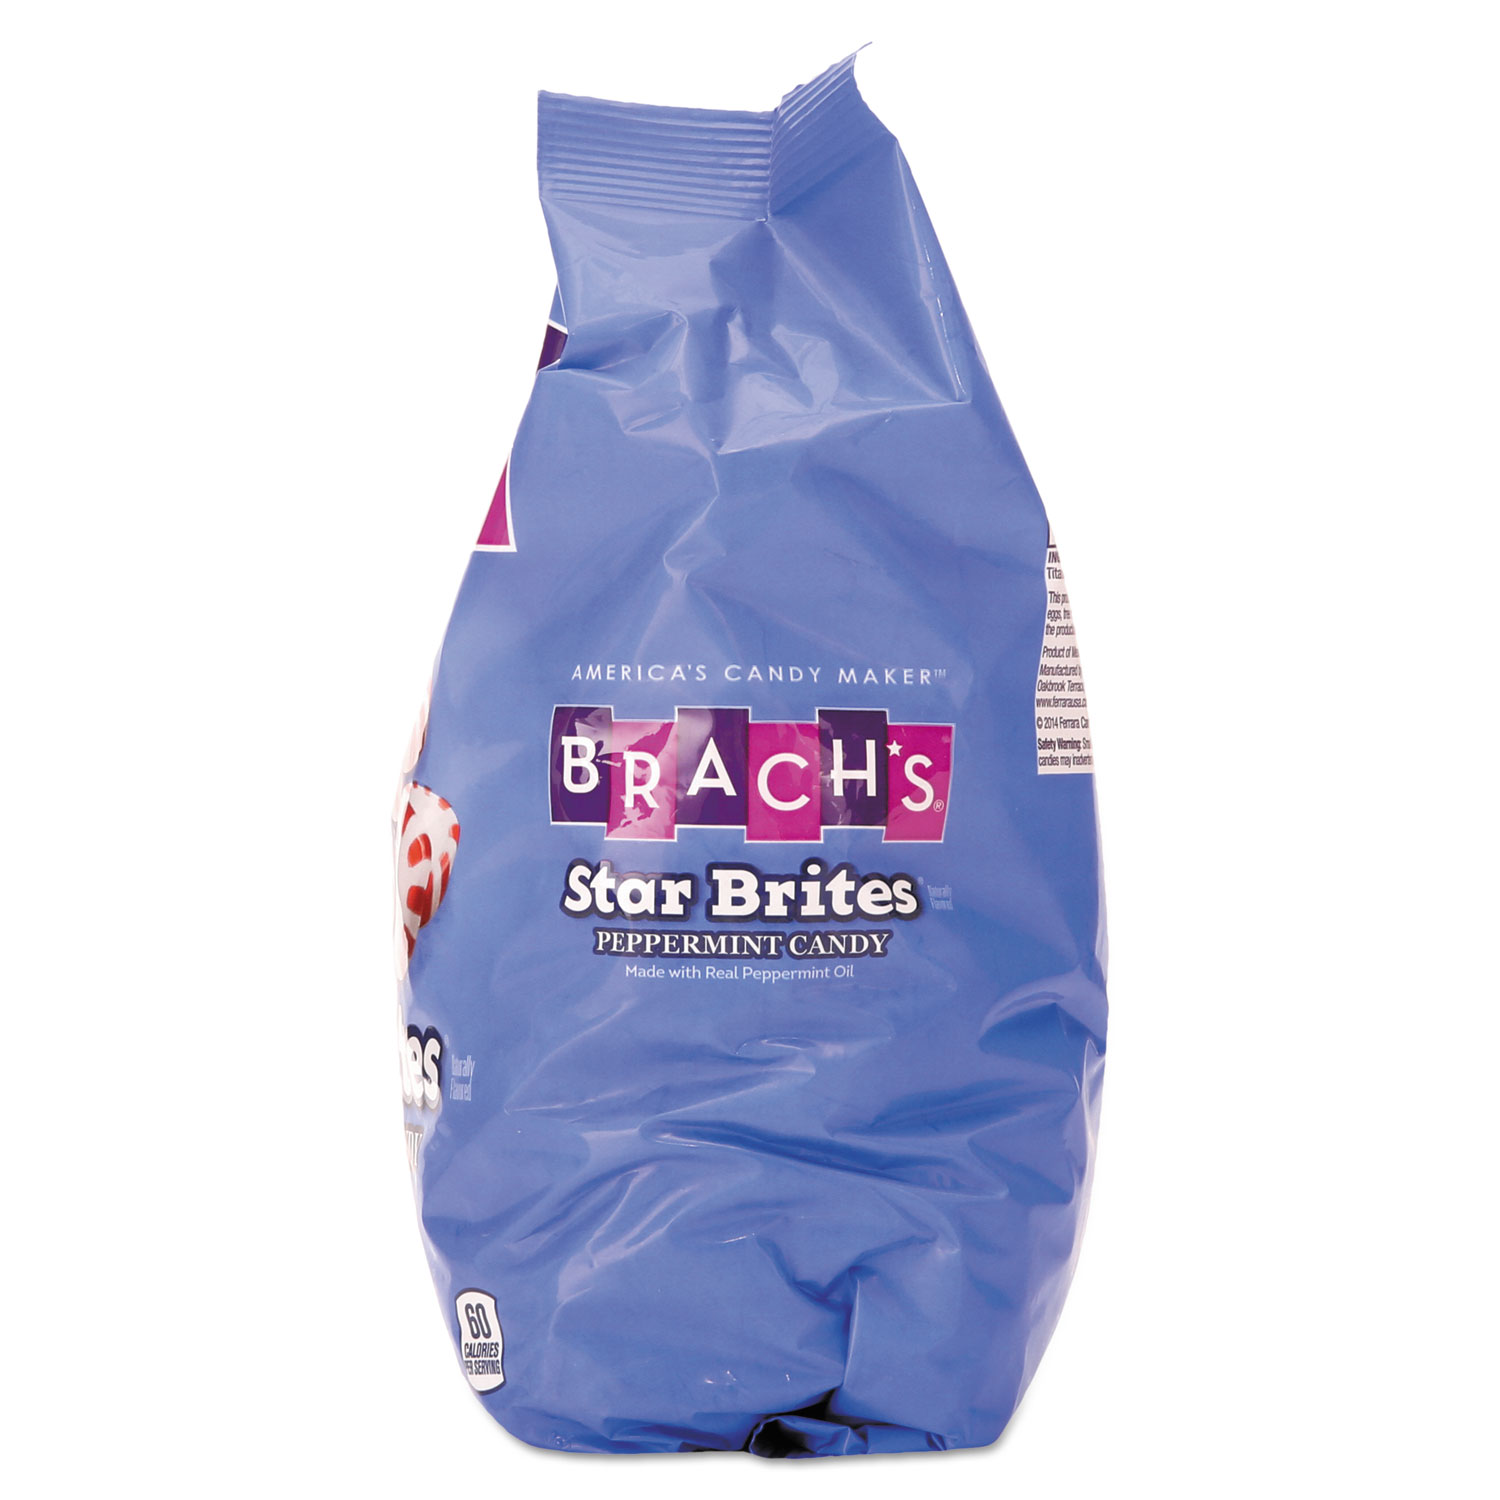 Star Brites Peppermint Candy, Individually Wrapped, 58 oz Bag